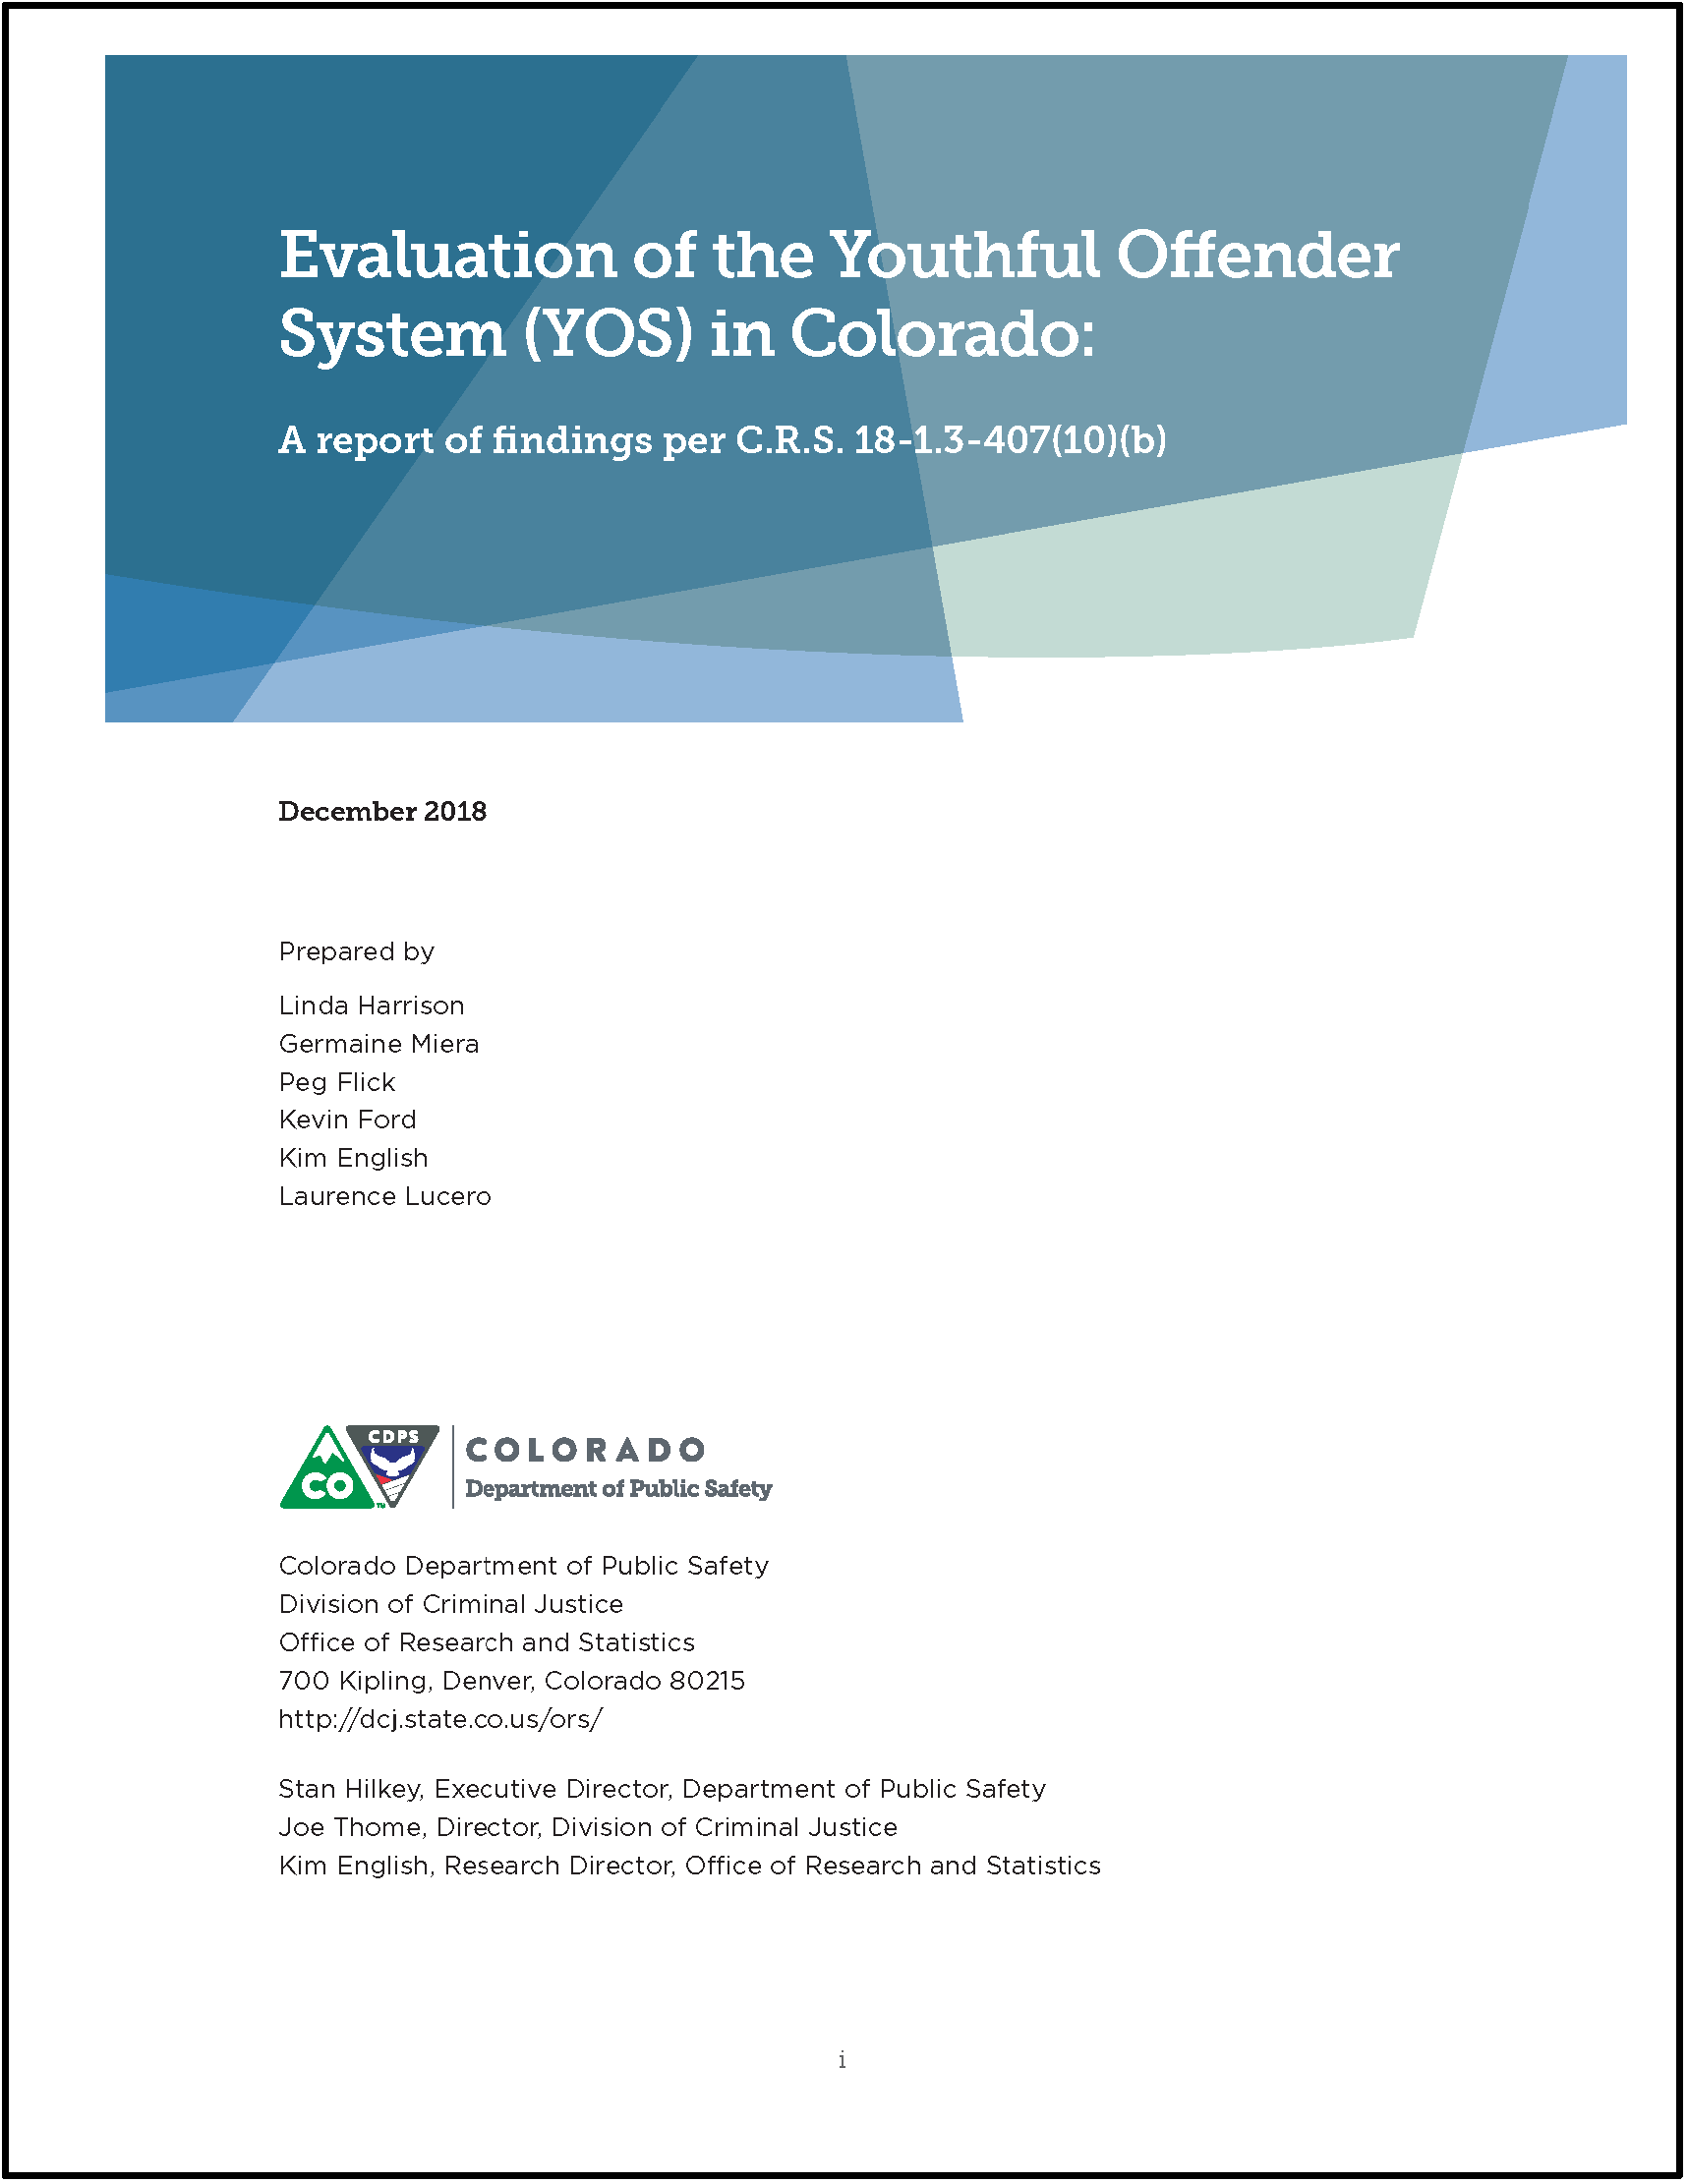 Evaluation of the Youthful Offender System (YOS) in Colorado (2018) (December 2018)